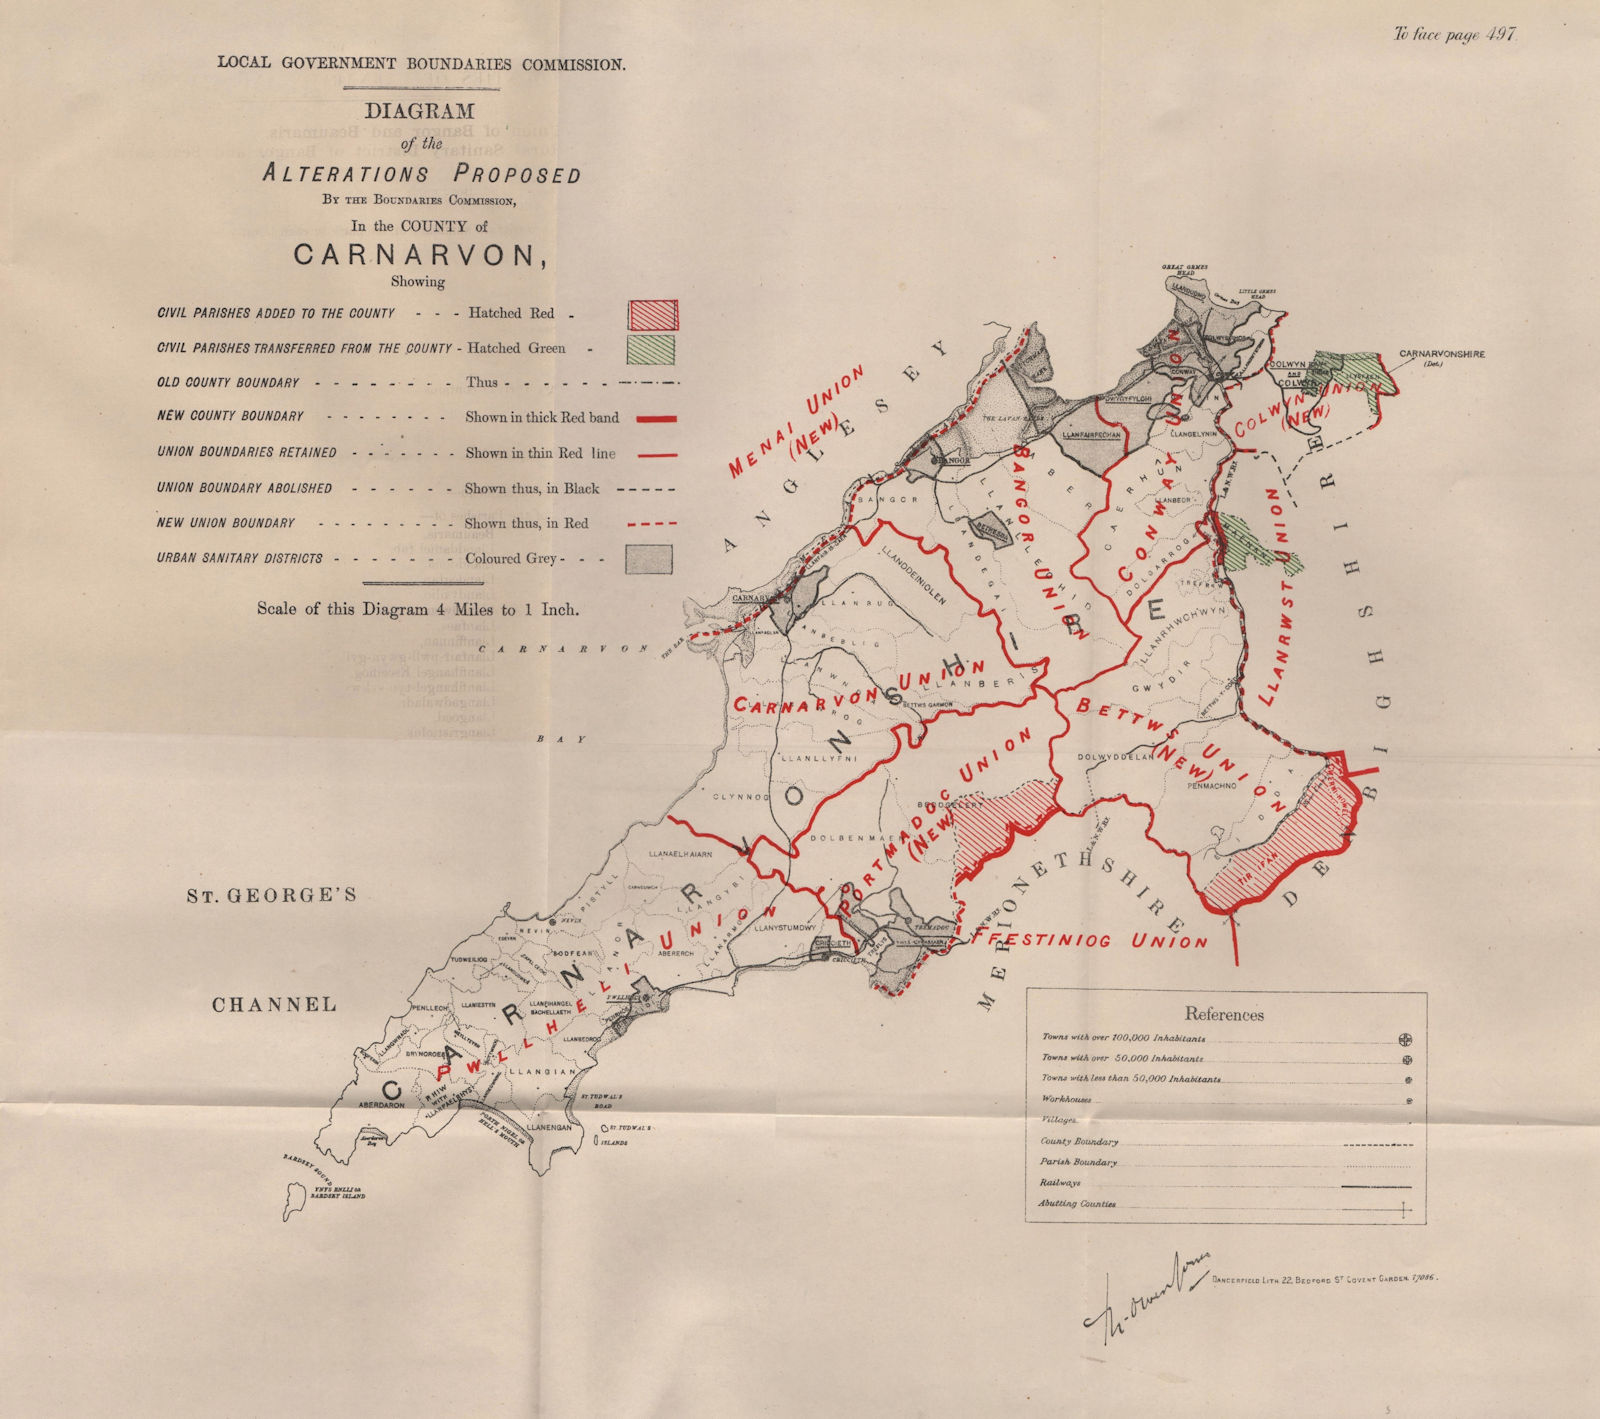 Associate Product Alterations Proposed in Caernarfonshire. JONES. BOUNDARY COMMISSION 1888 map